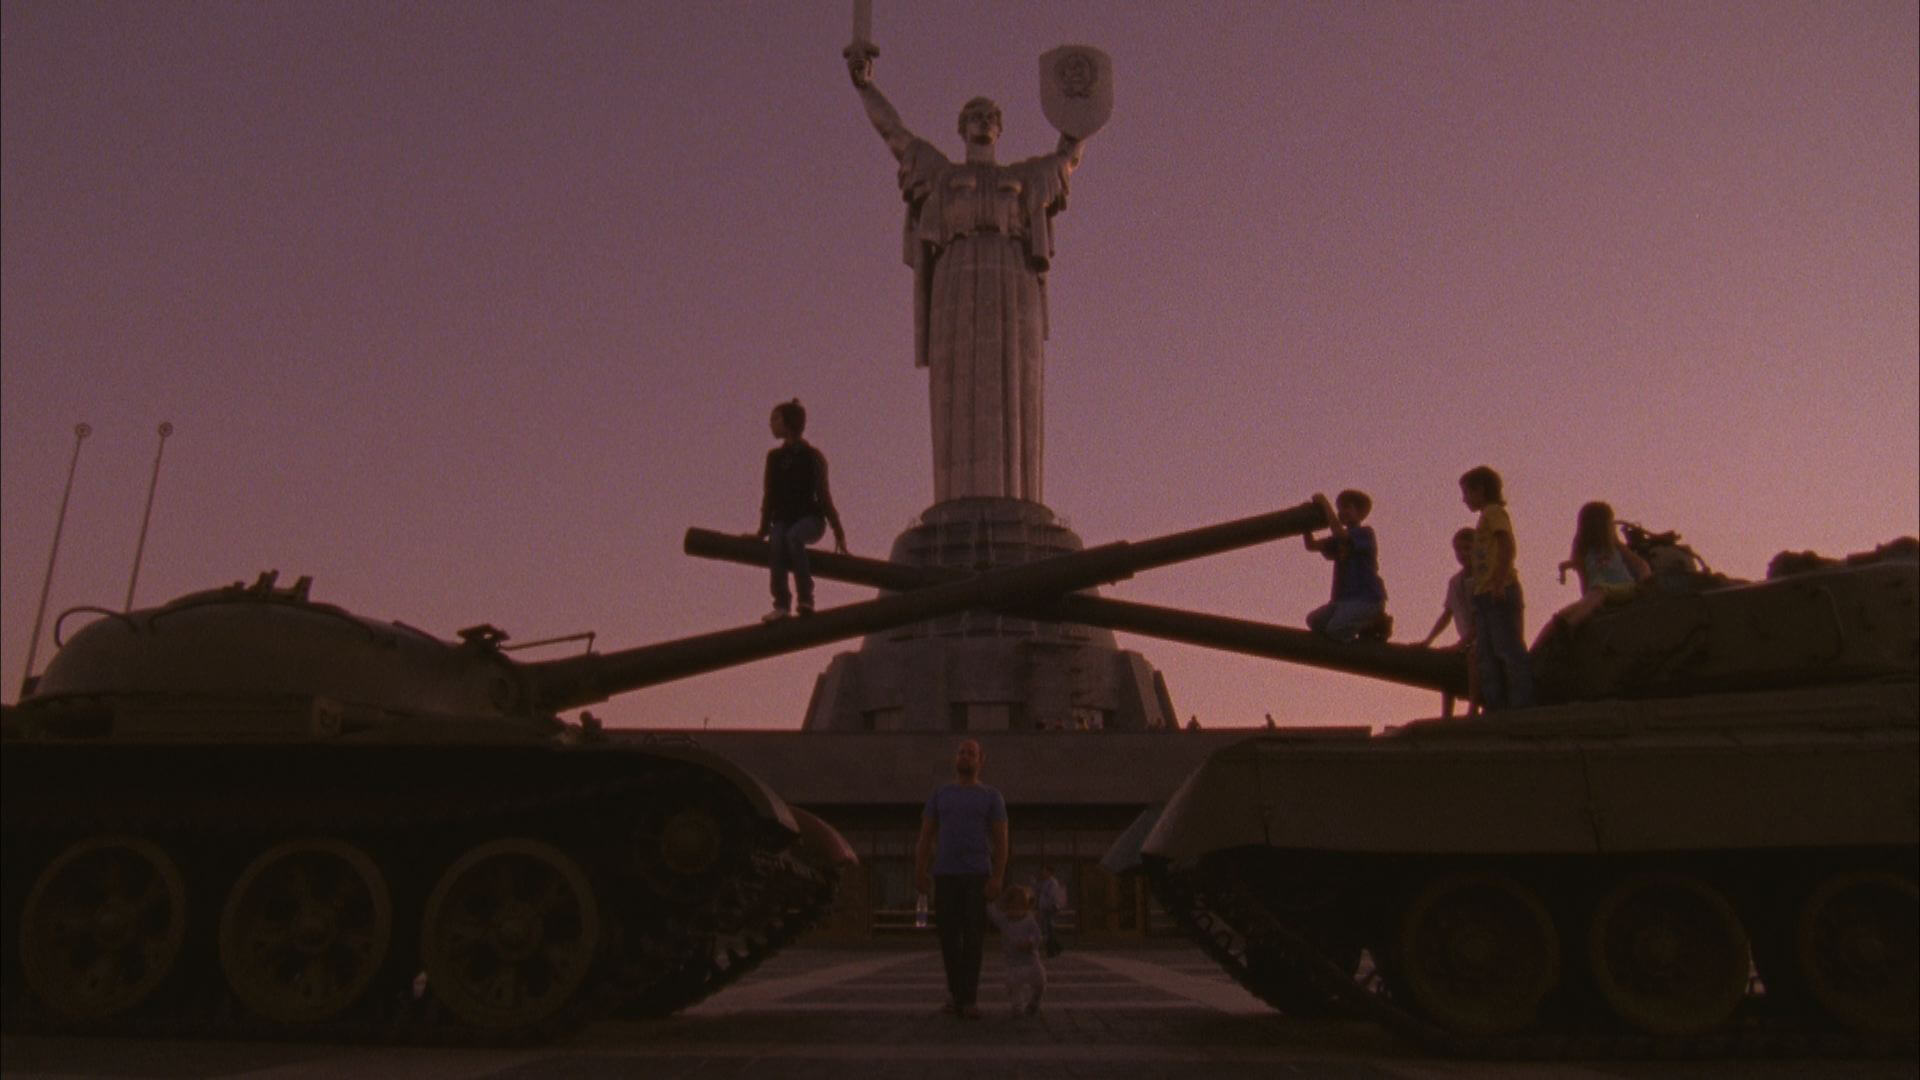 Still from The Vanquishing of the Witch Baba Yaga. Two army tanks face each other with children atop. A large statue stands tall in the background. Color photograph.